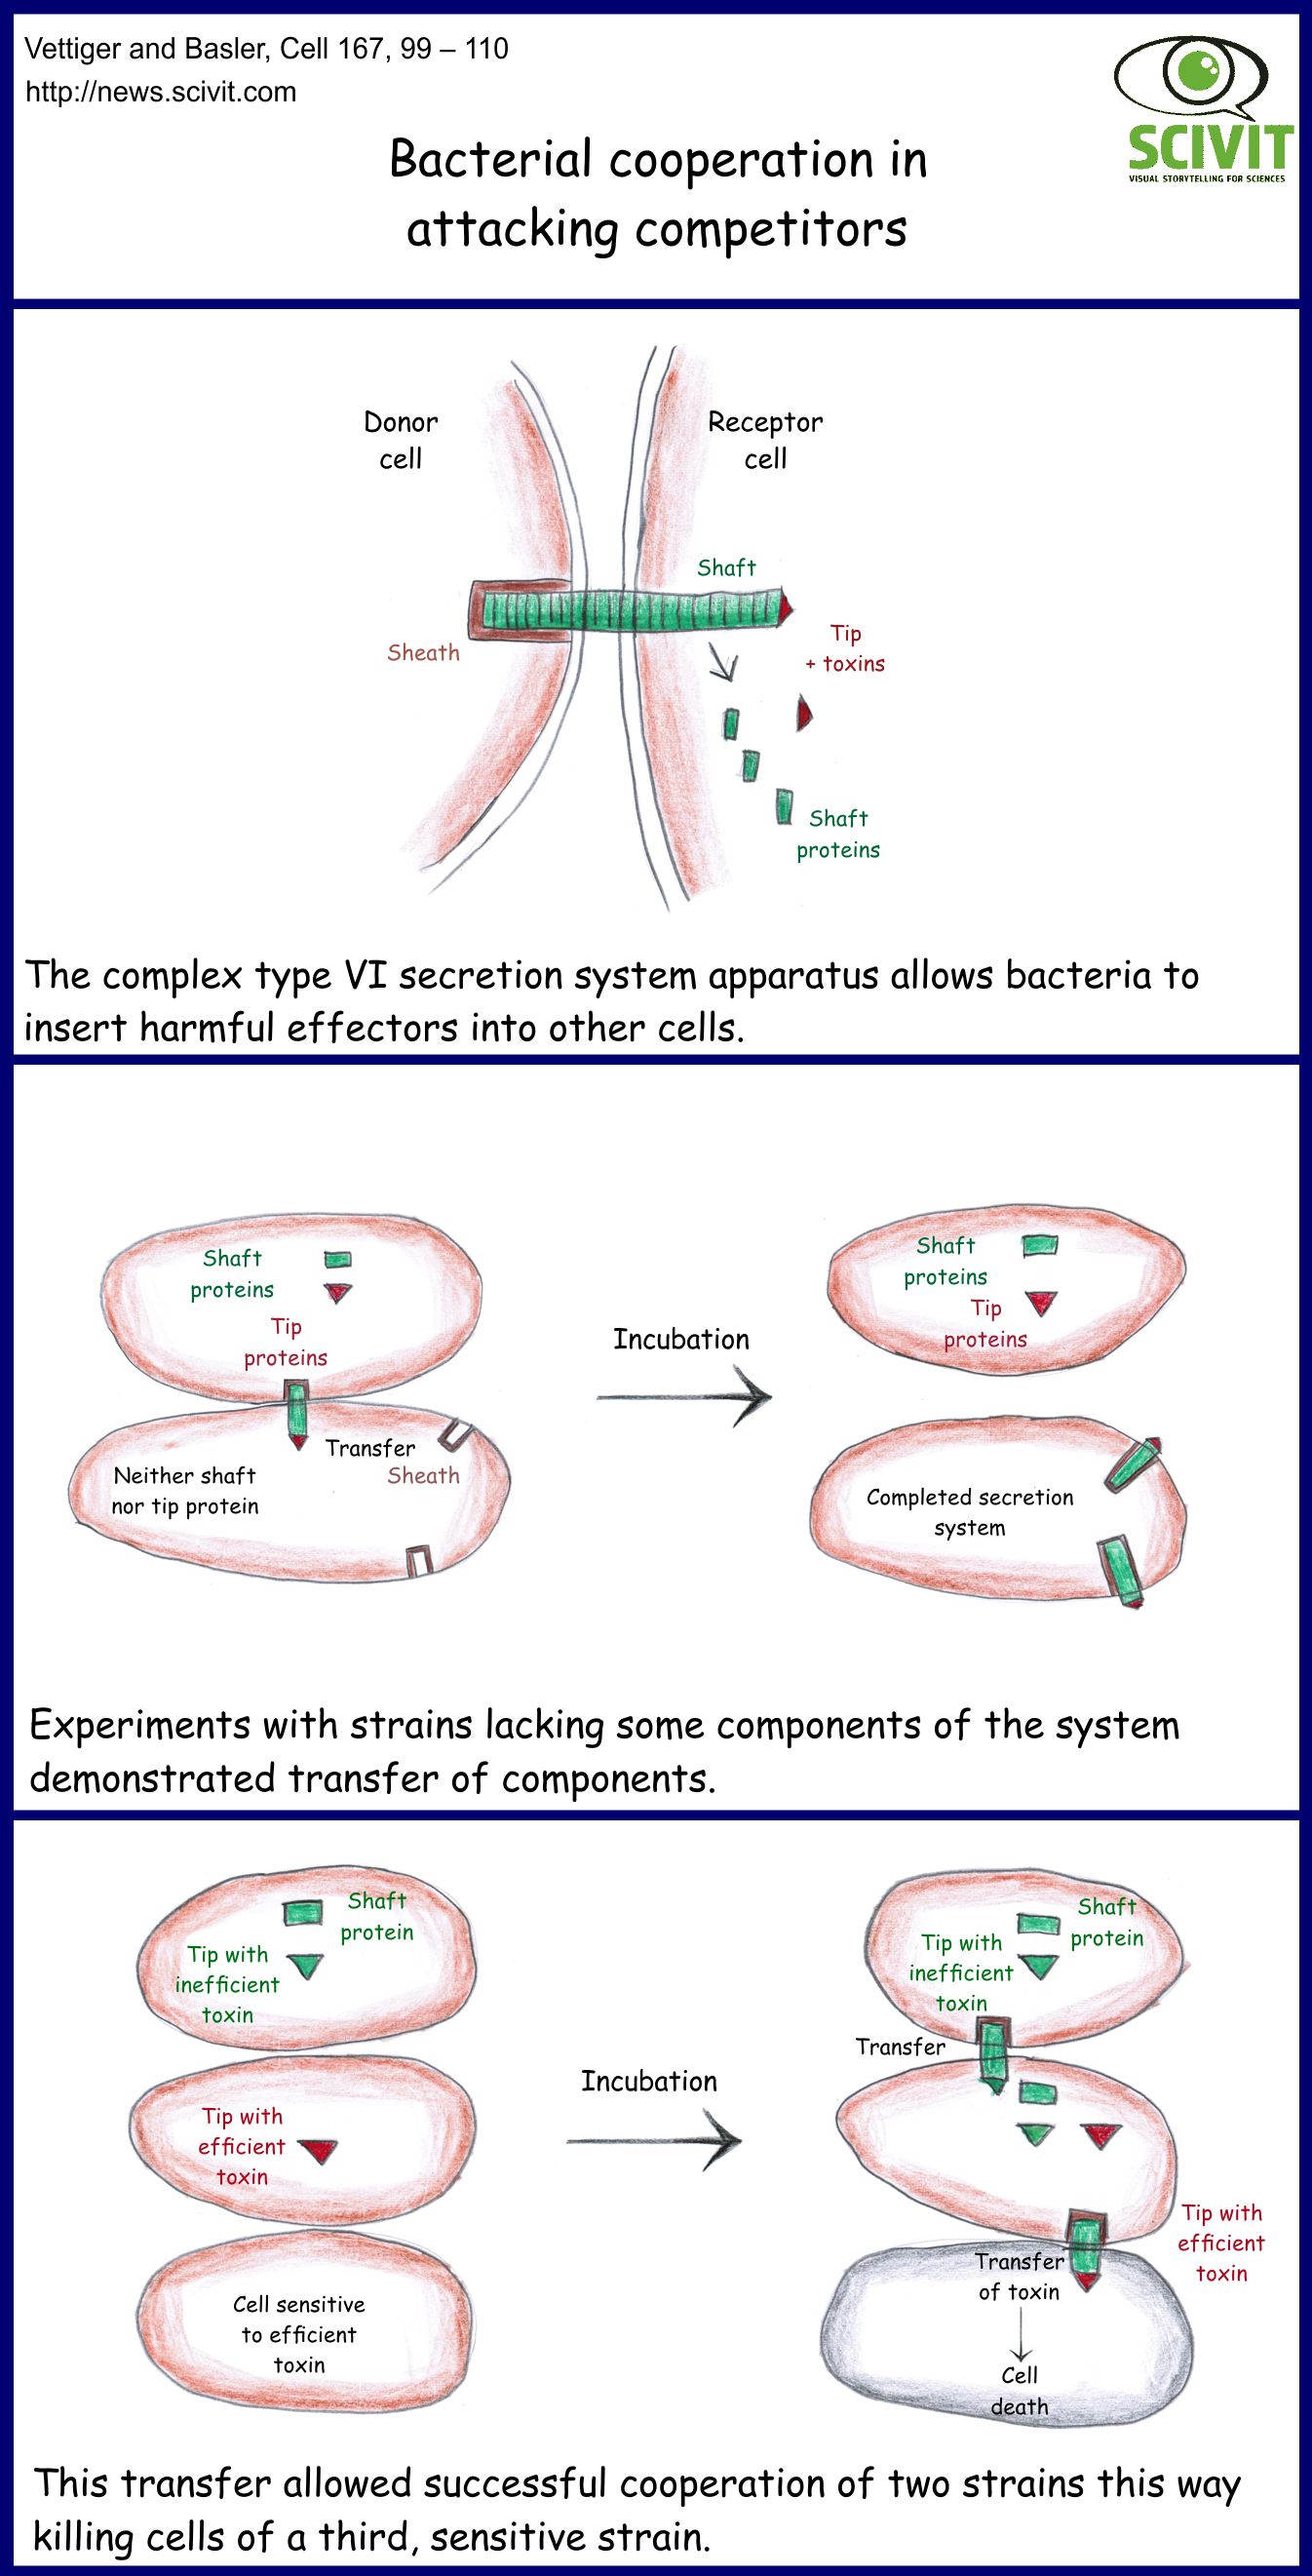 Bacterial cooperation in attacking competitors